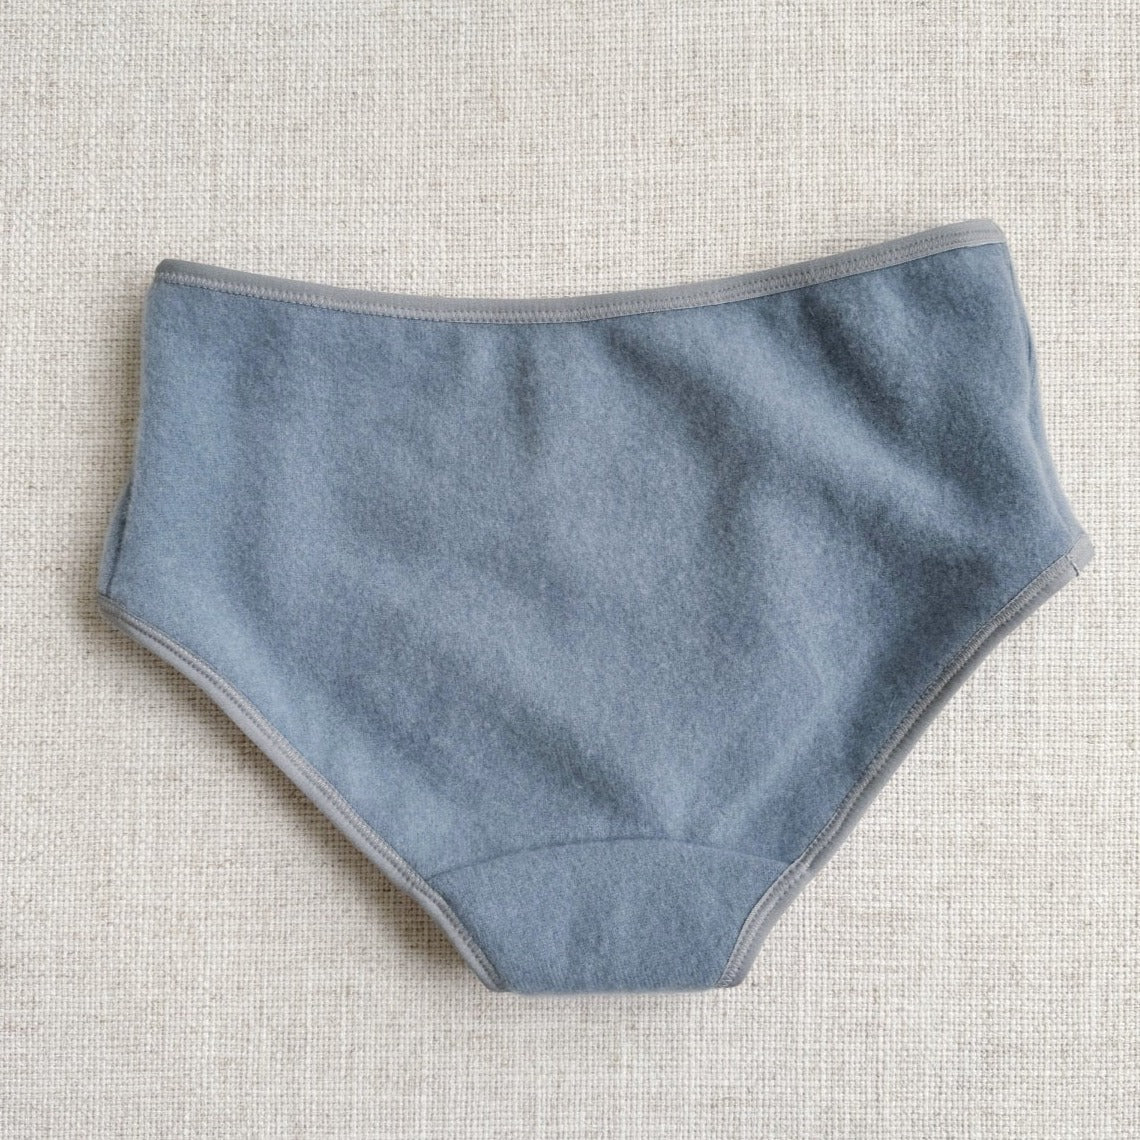 100% pure cashmere hipster brief for woman, made in canada  cashmere and wool underwear and bralettes by Econica 